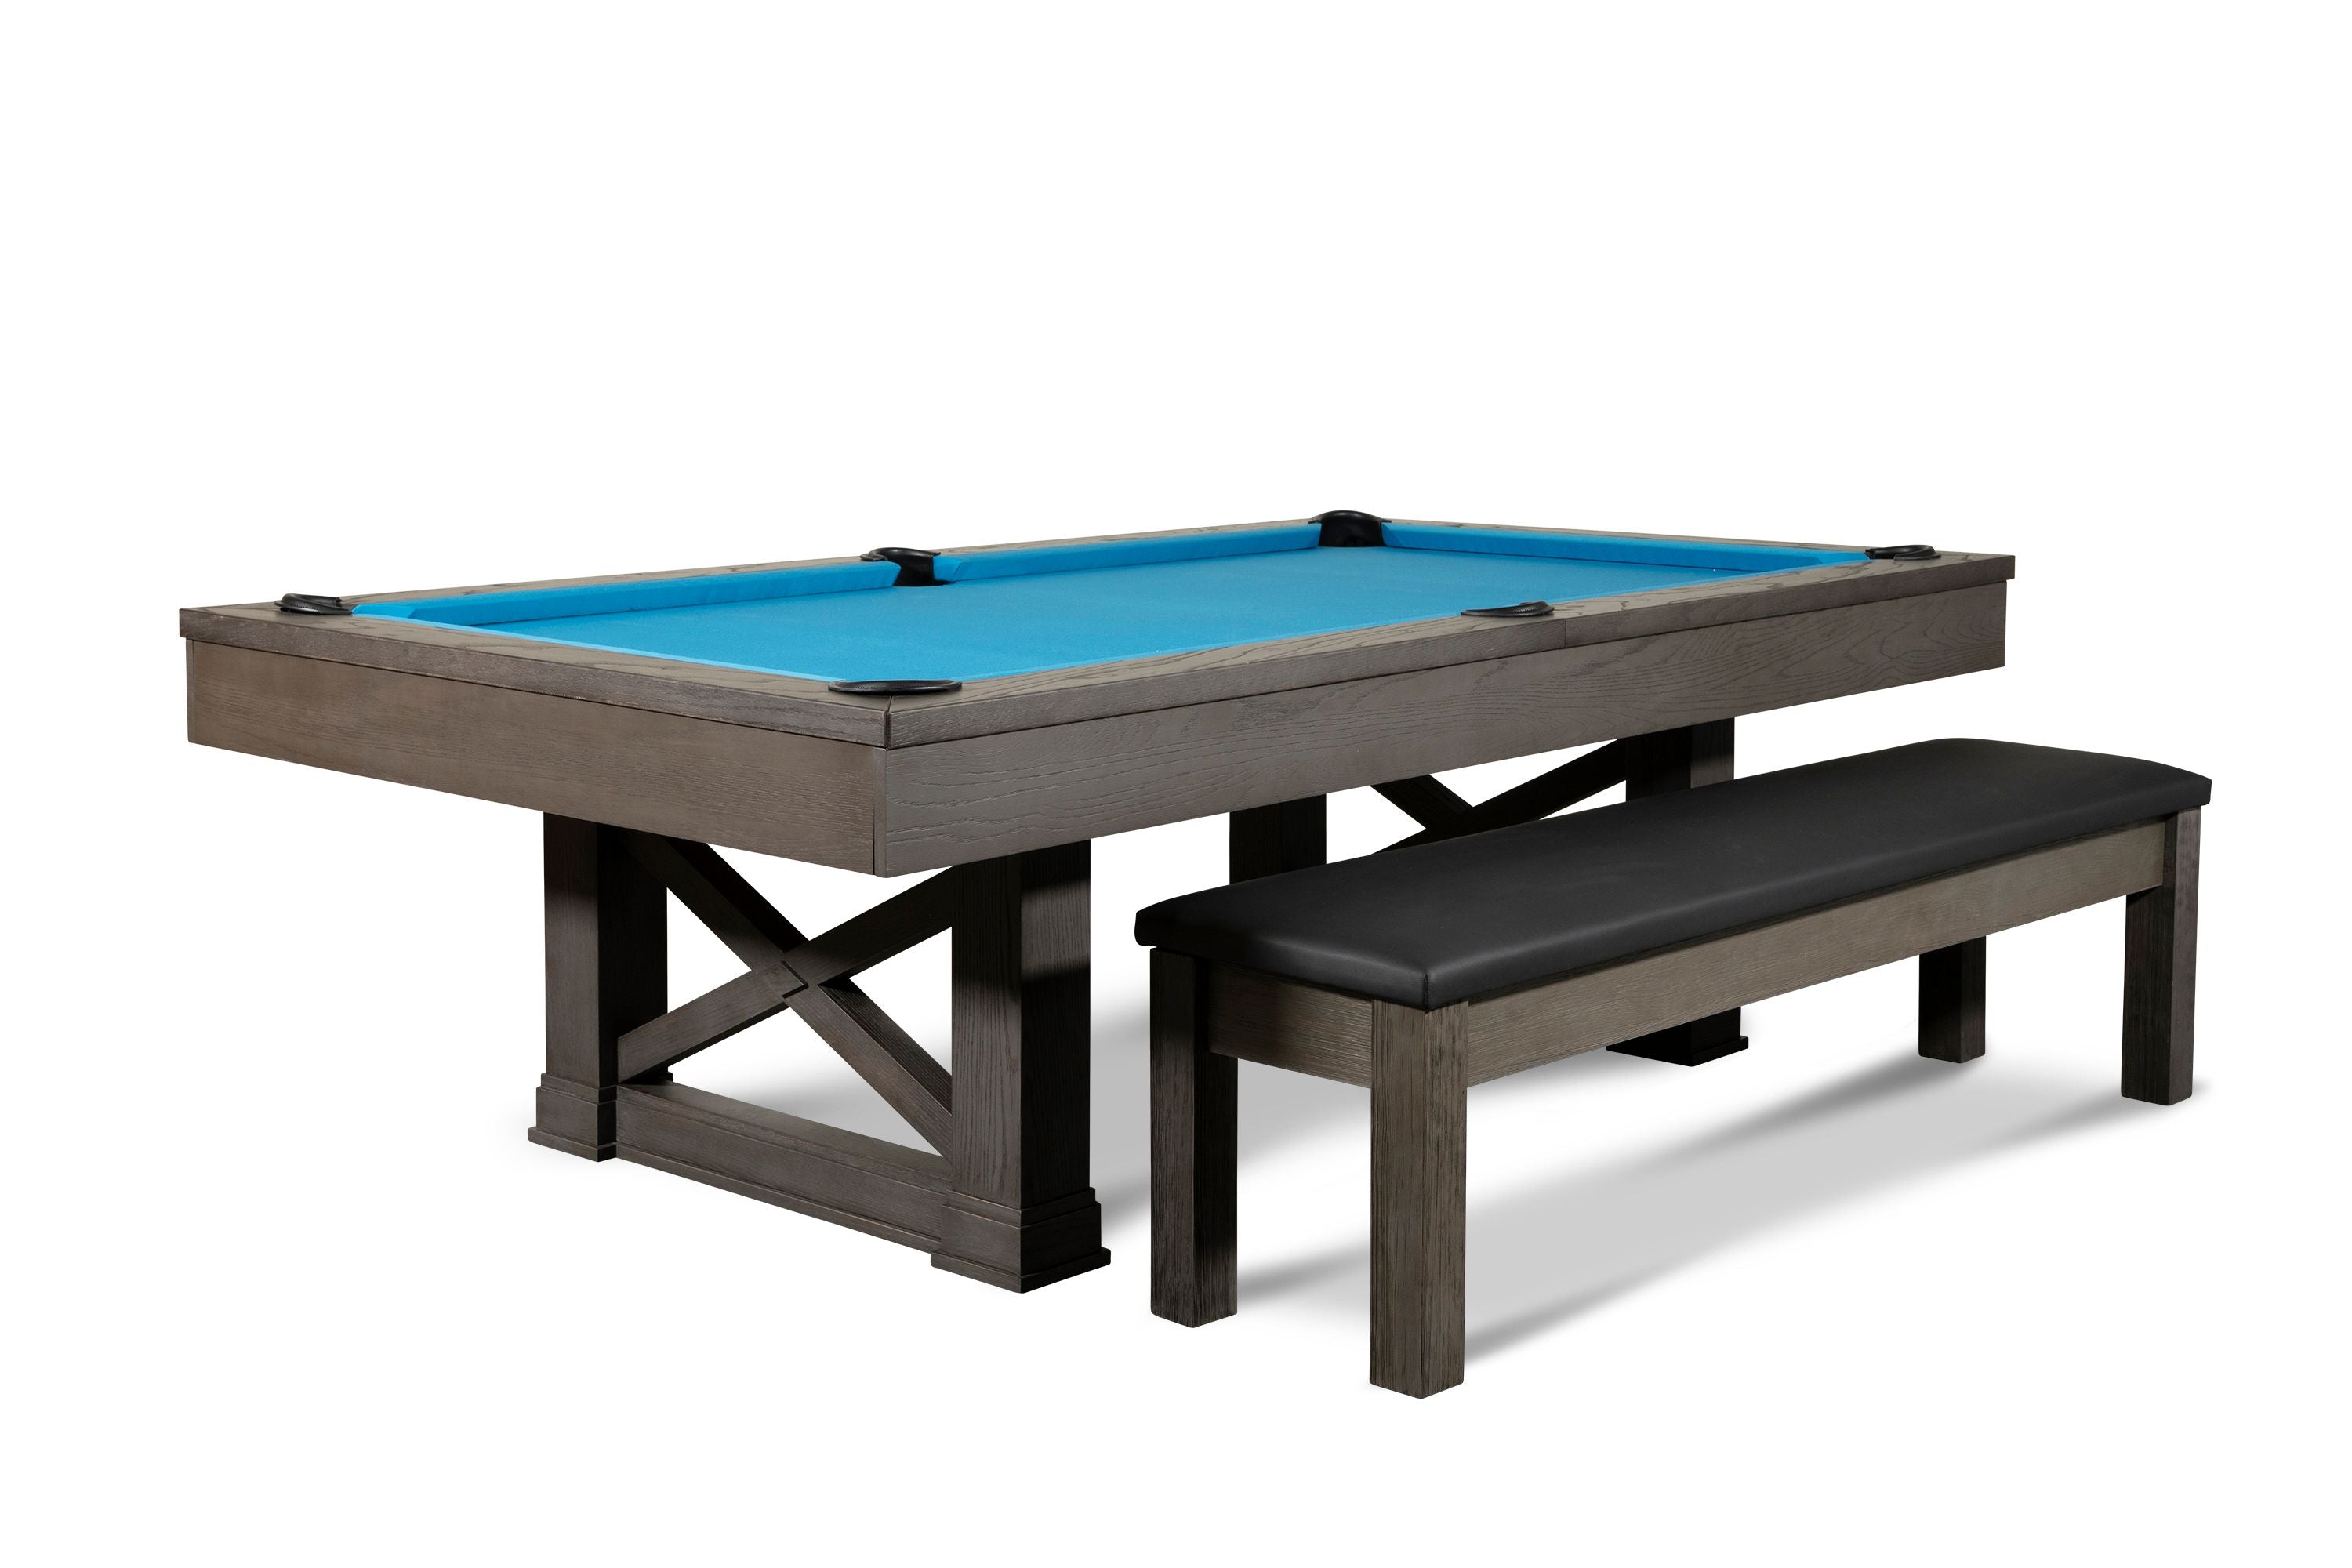 Nixon Billiards Nora Slate Pool Table ISAF-90060/ISAF-90062 Charcoal With Matching Chair